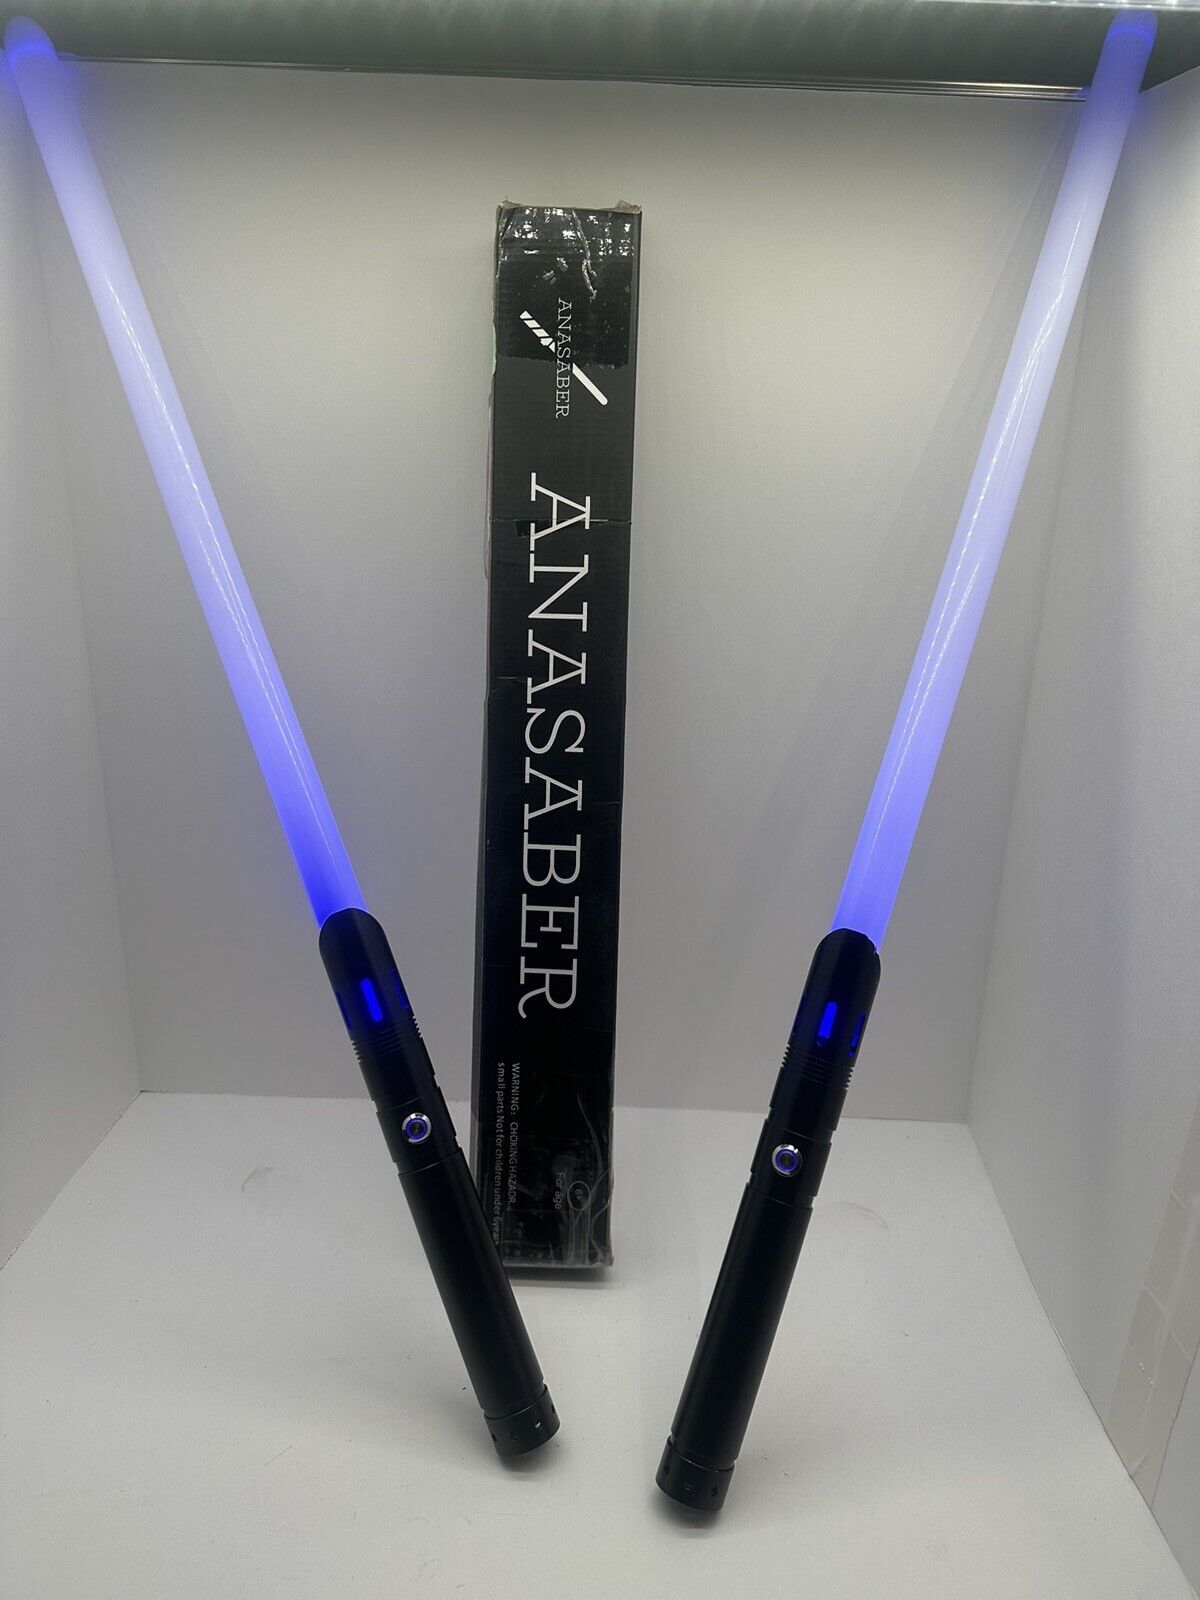 2x ANASABER Dueling Light Saber, Motion Control Lightsabers for Adults, Smooth